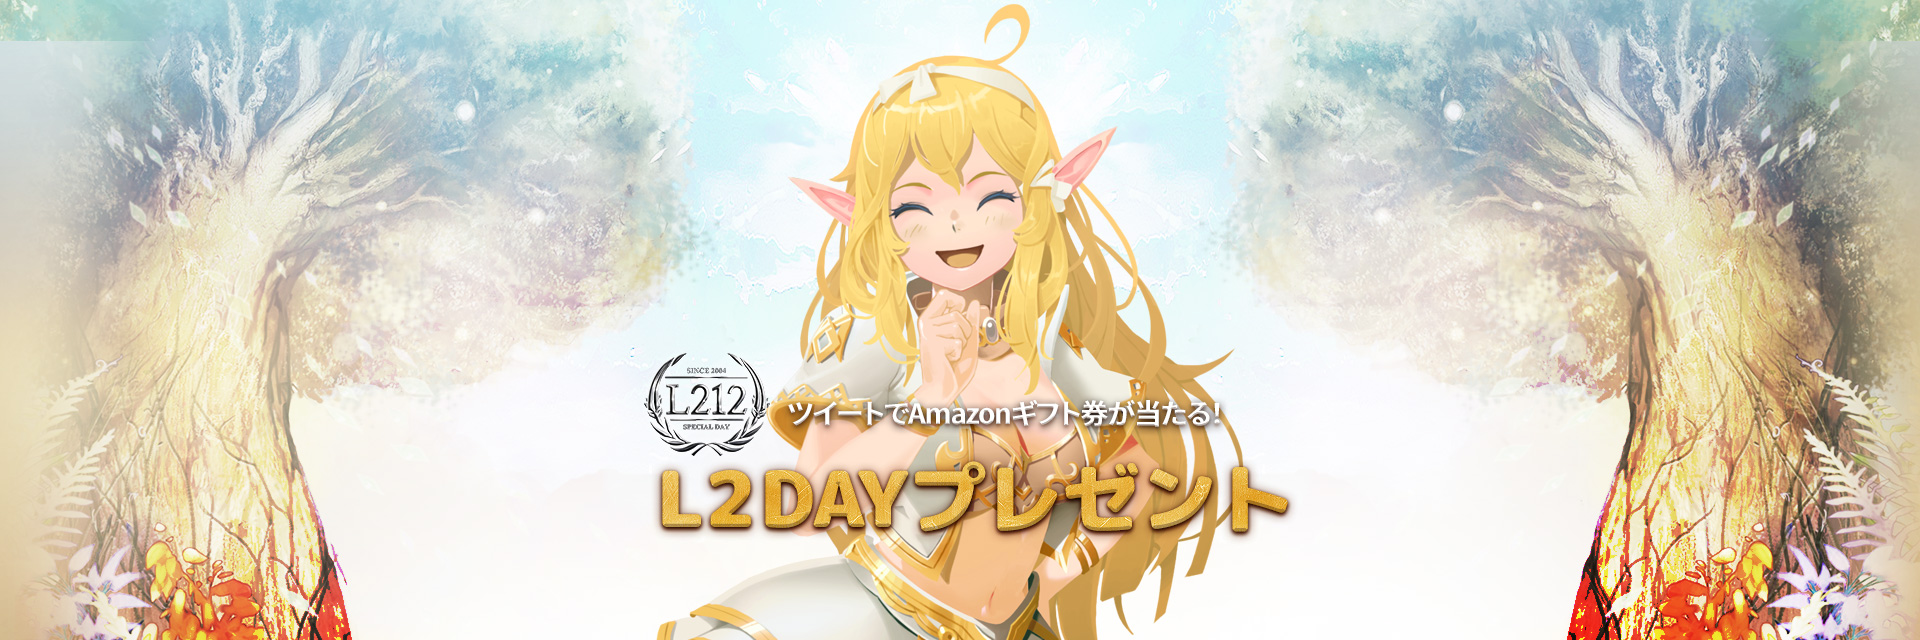 L2DAYプレゼント